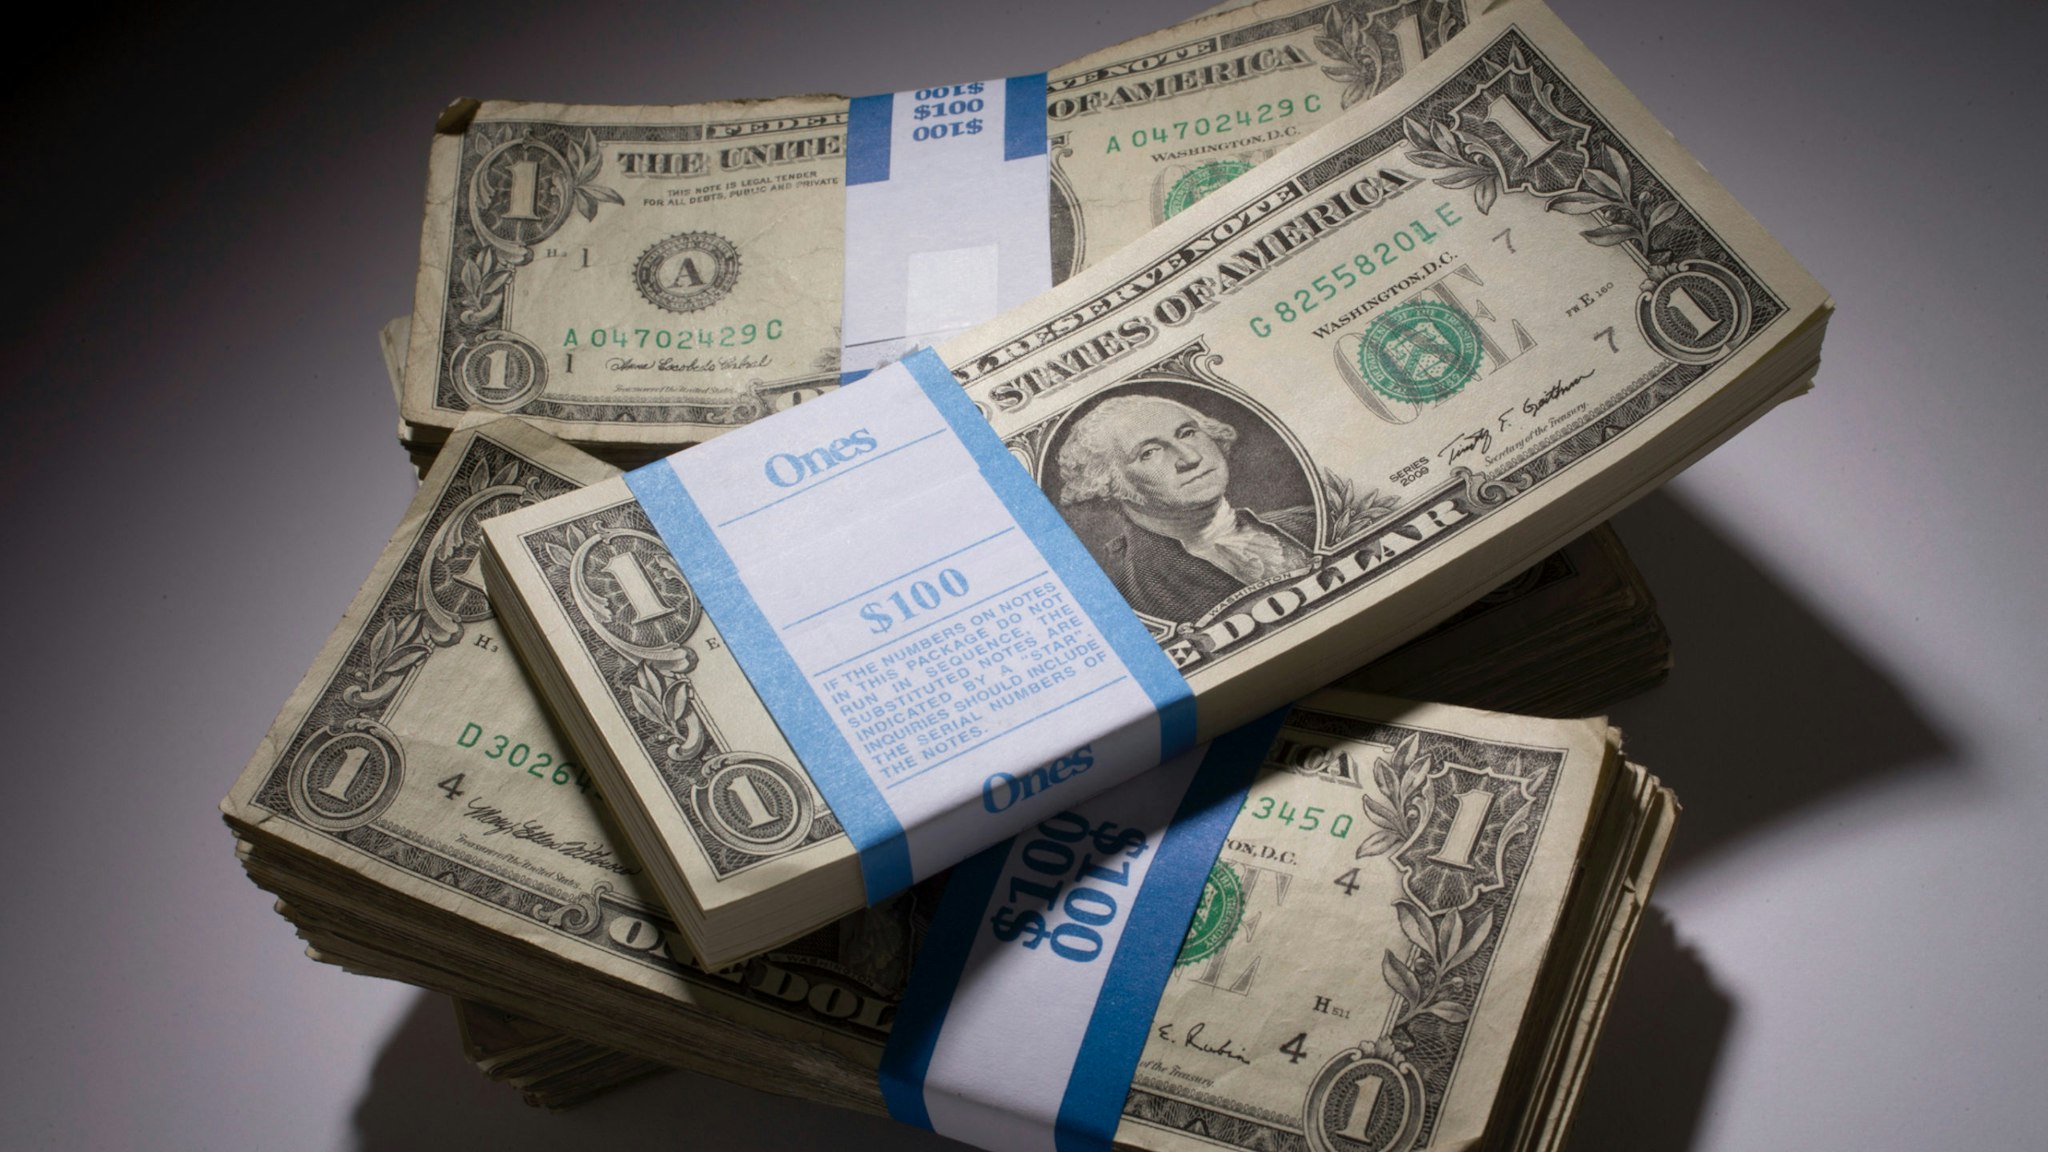 Stacks of U.S. one-dollar bills are arranged for a photograph in New York, U.S., on Monday, Feb. 4, 2013.